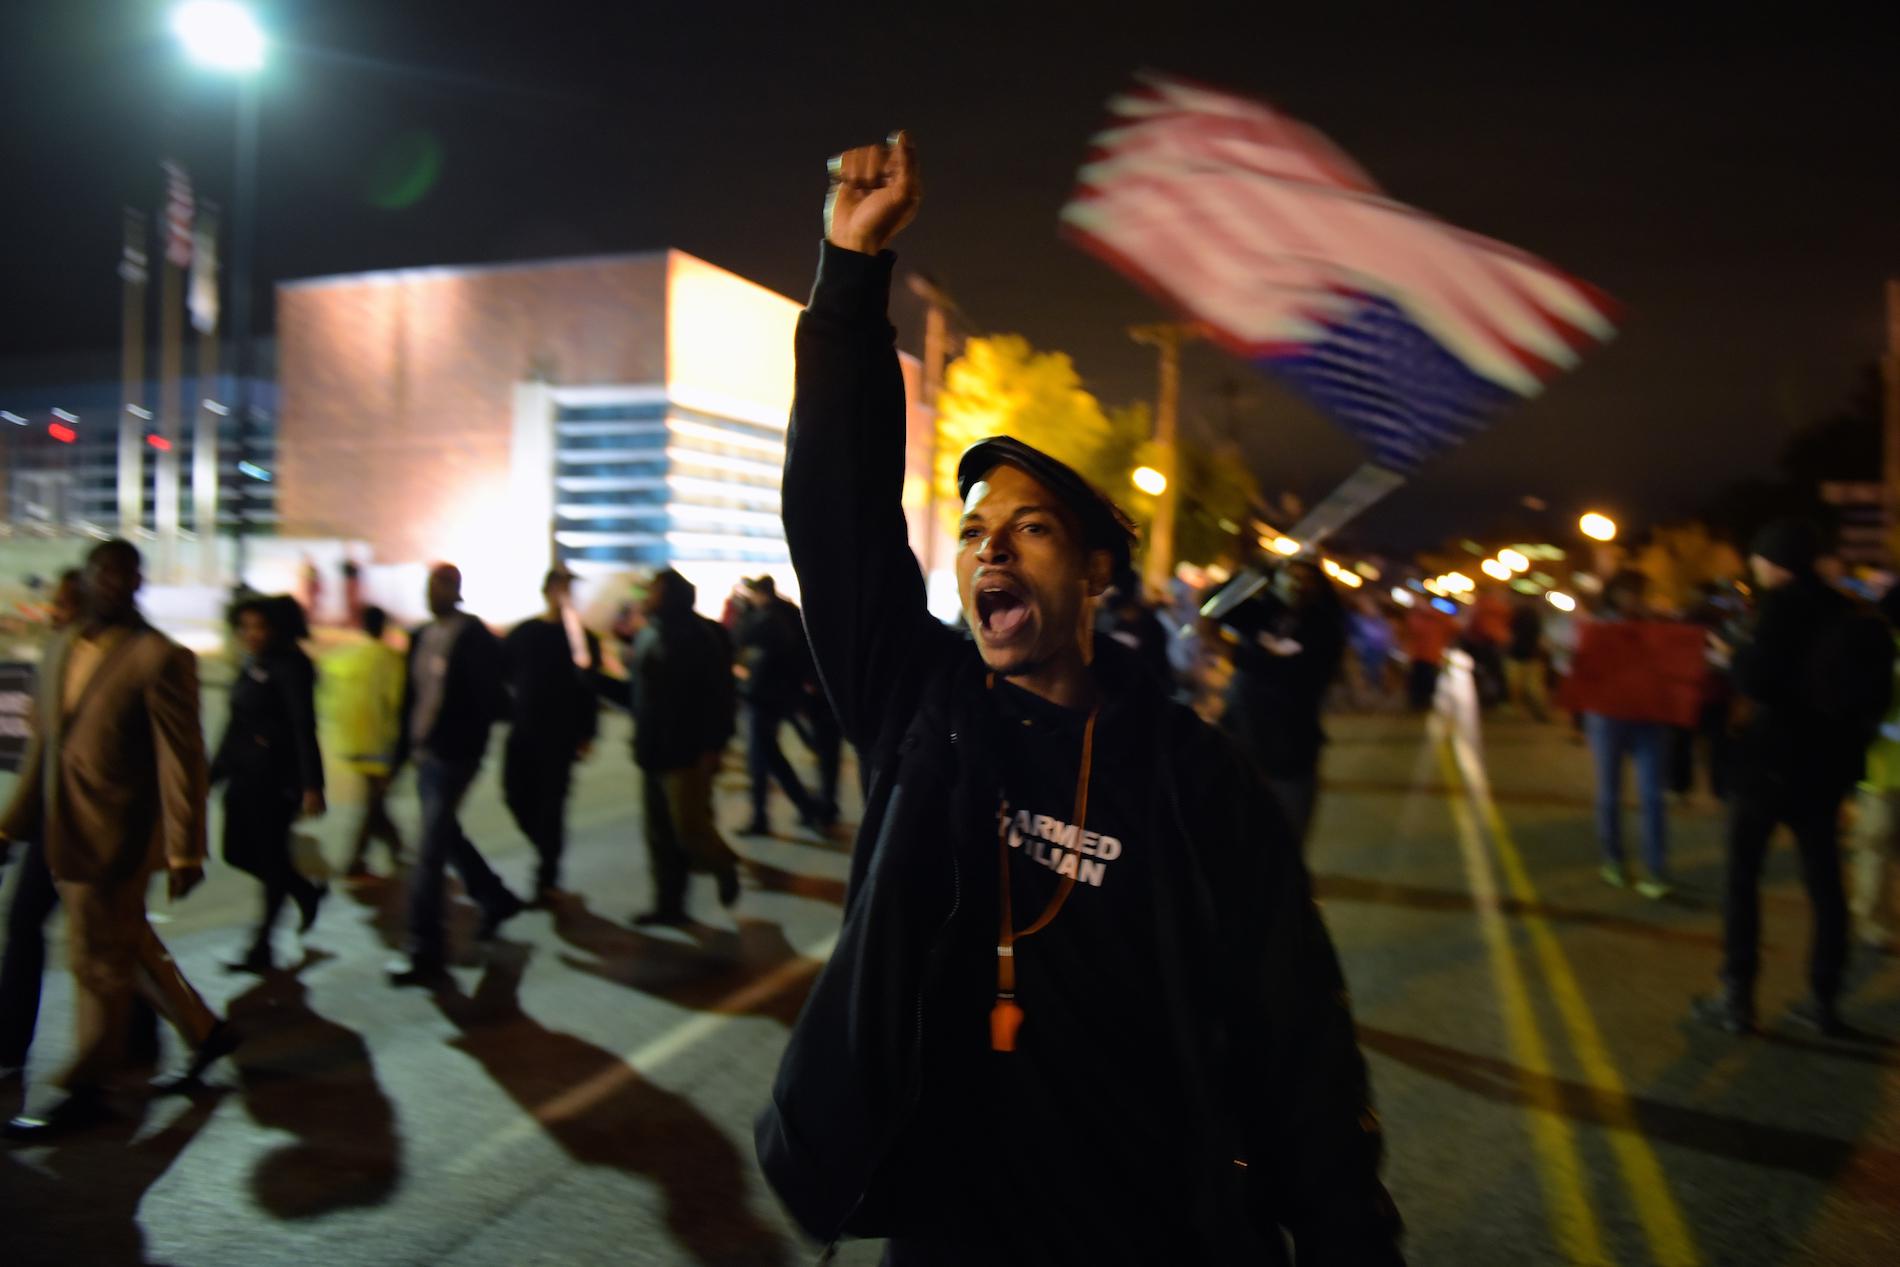 A protestor raising his fist and chanting, an American flag in the background